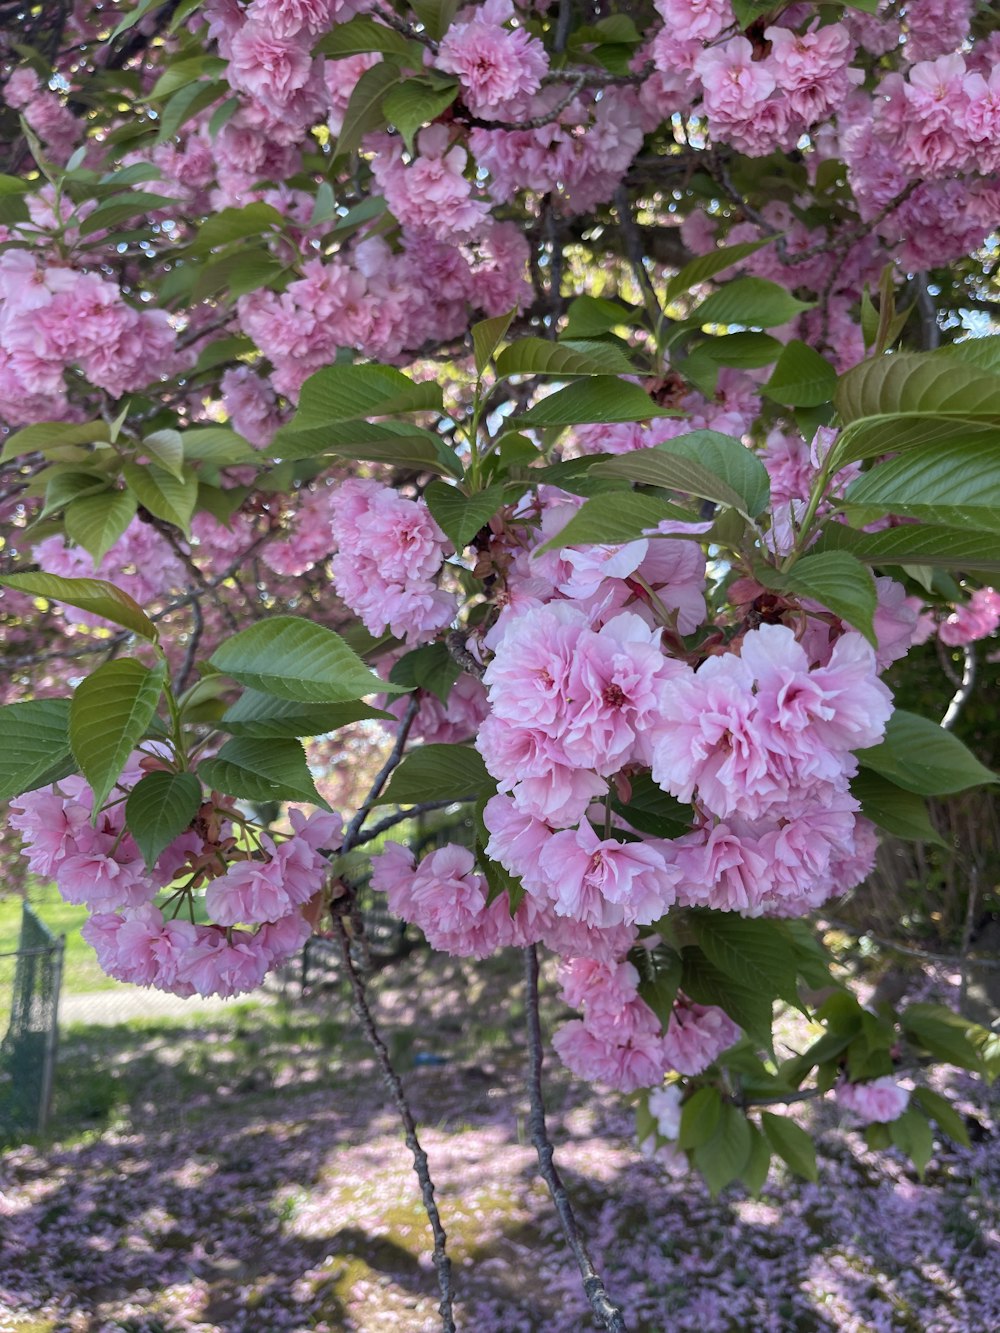 pink flowers blooming on a tree in a park